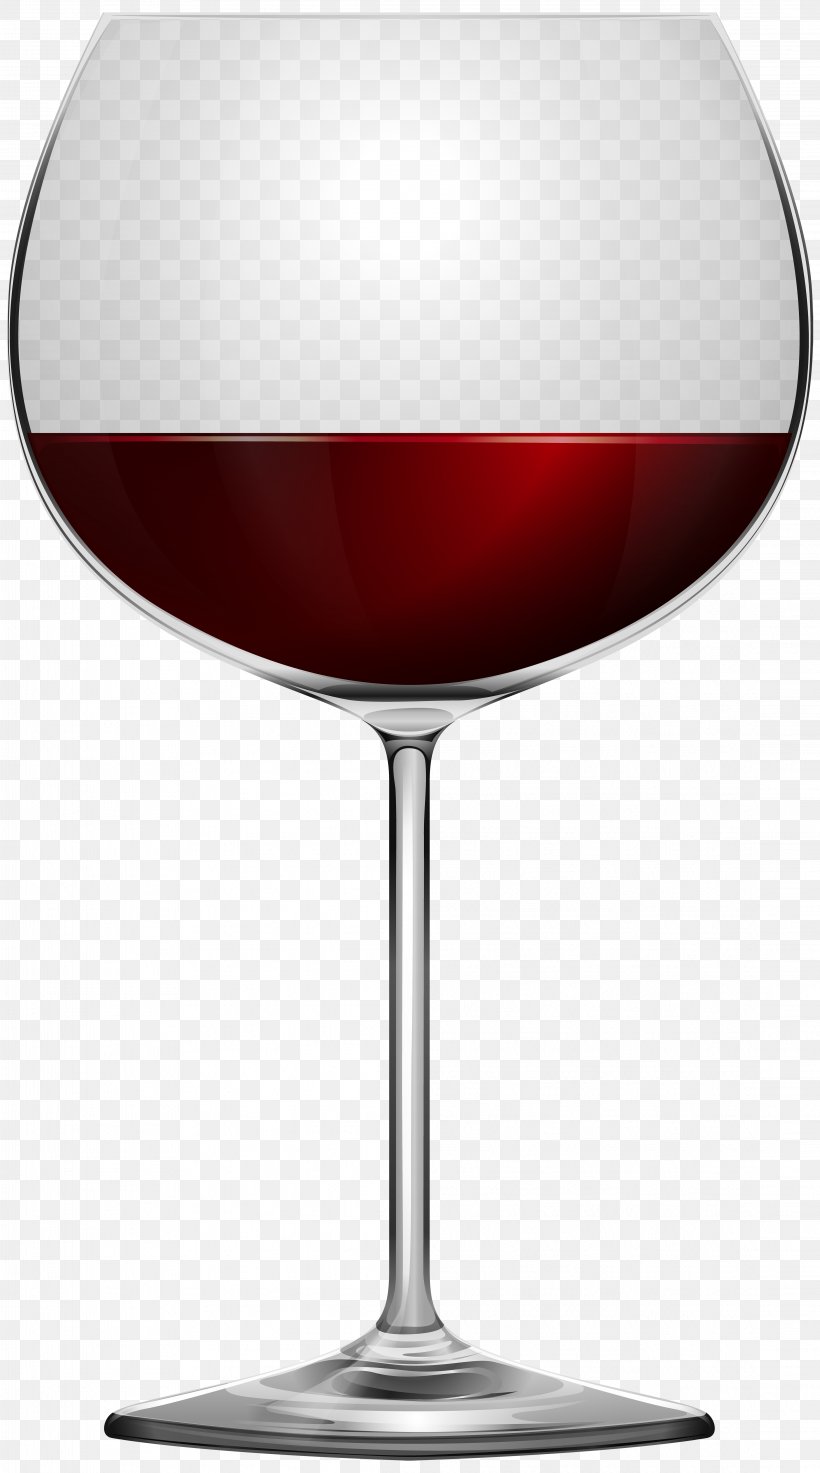 Image File Formats Lossless Compression, PNG, 4452x8000px, Red Wine, Champagne Glass, Champagne Stemware, Cup, Drink Download Free